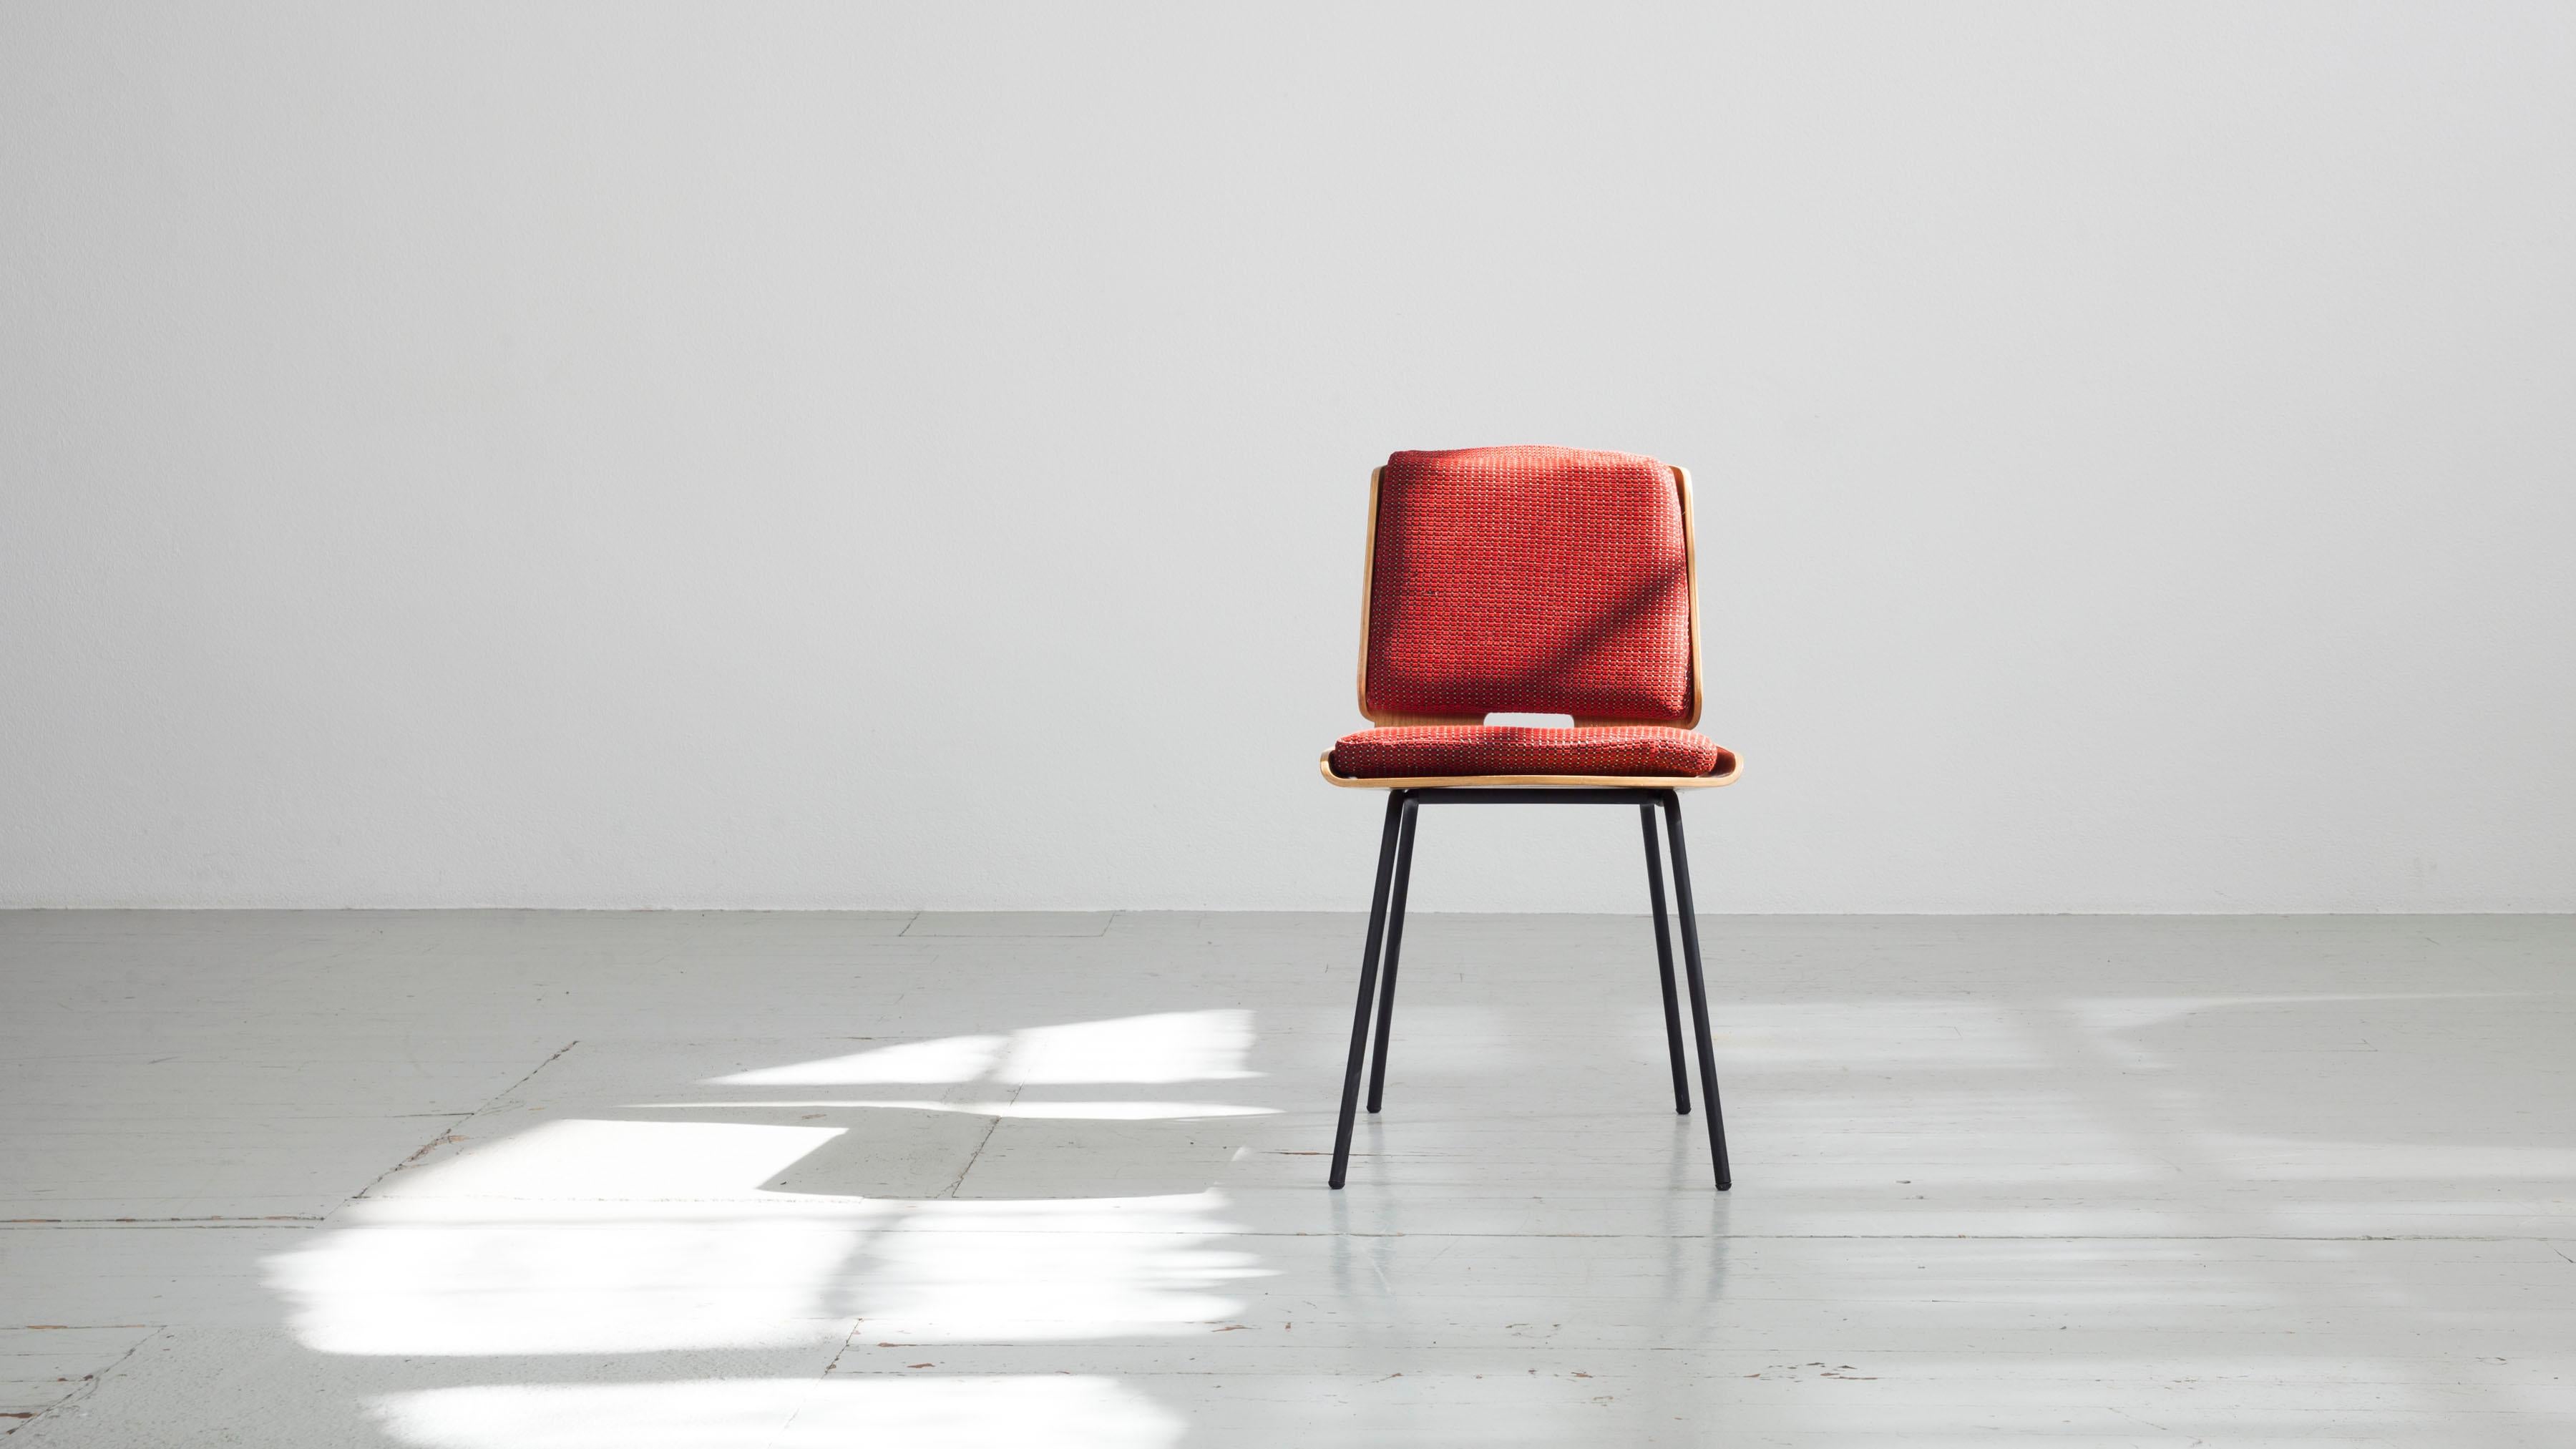 Chair designed by Giancarlo De Carlo, manufactured by Arflex, Italy, 1954. This chair is an original commission for the furnishing of the motor yacht 